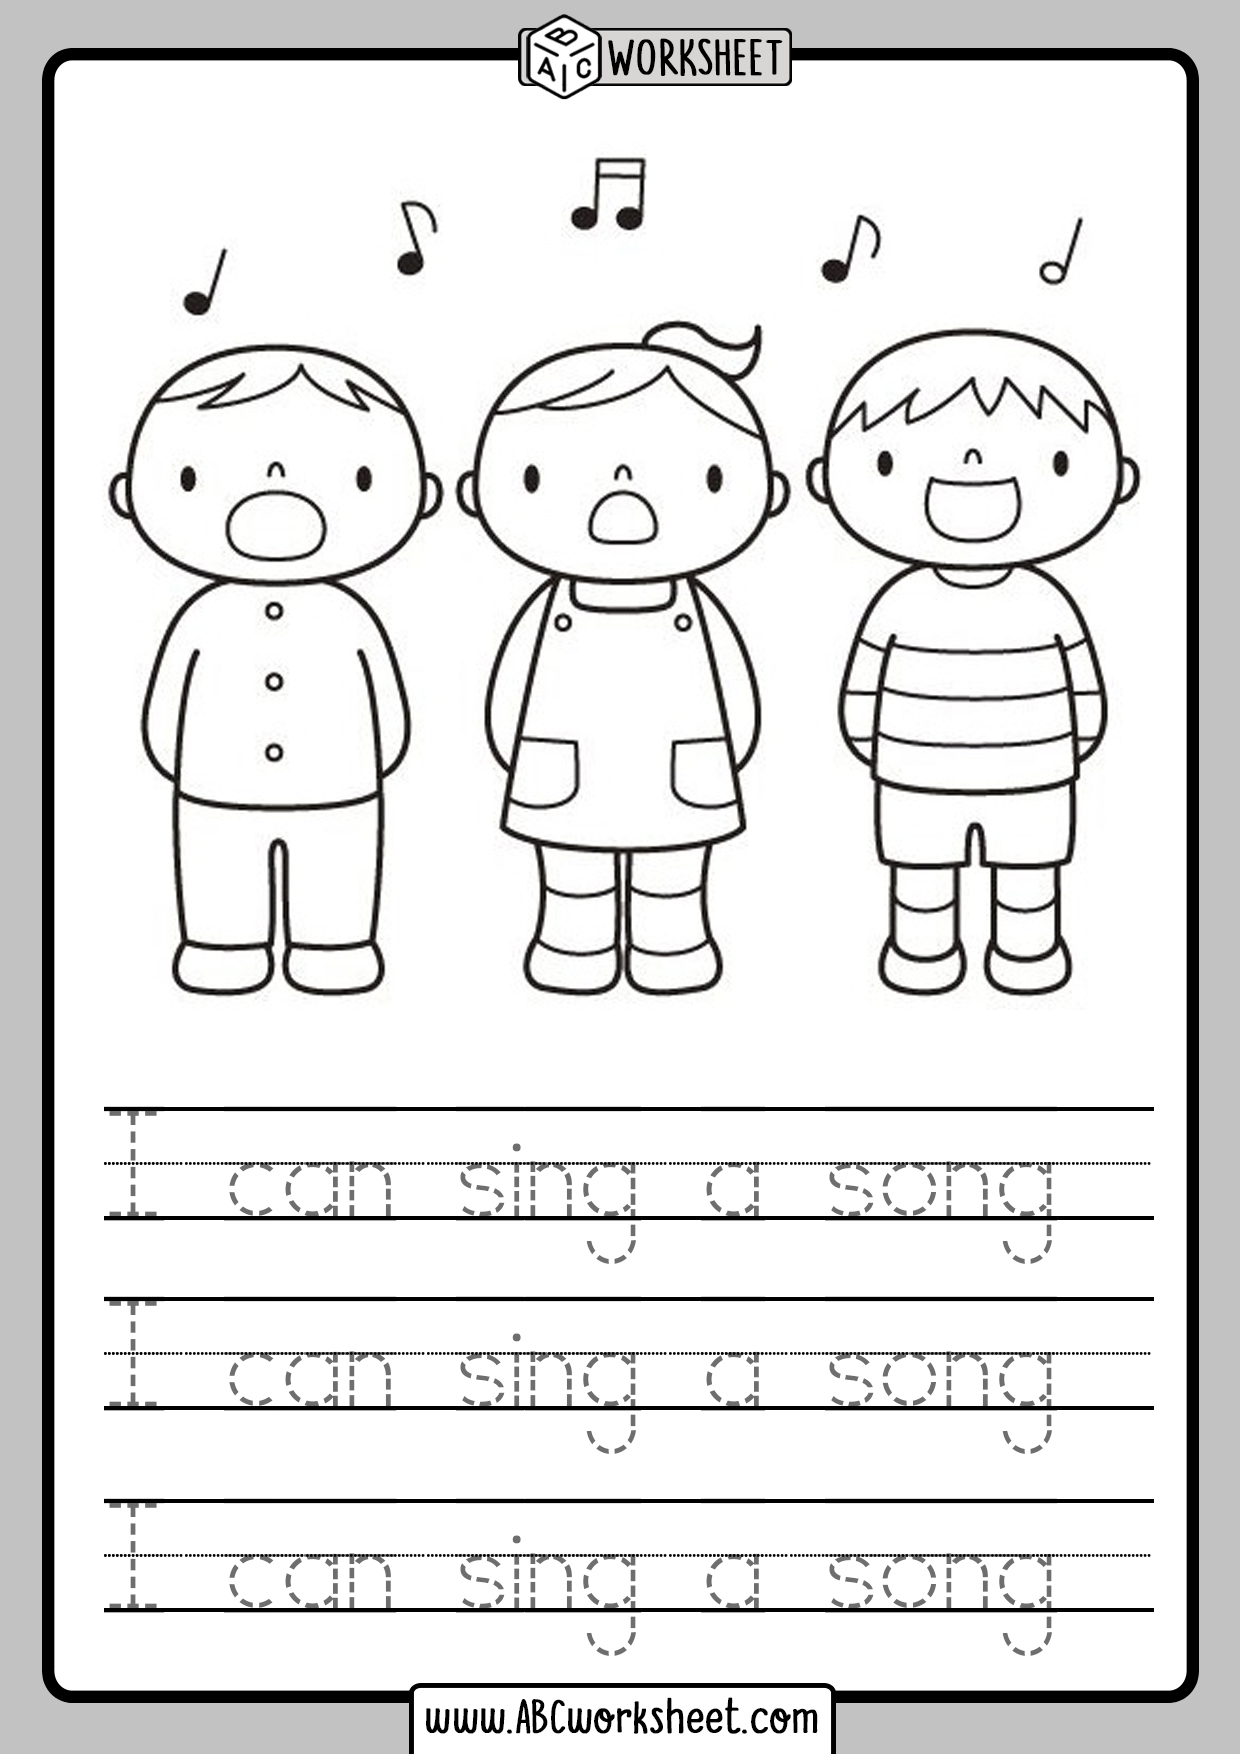 Kindergarten Read and Trace - ABC Worksheet